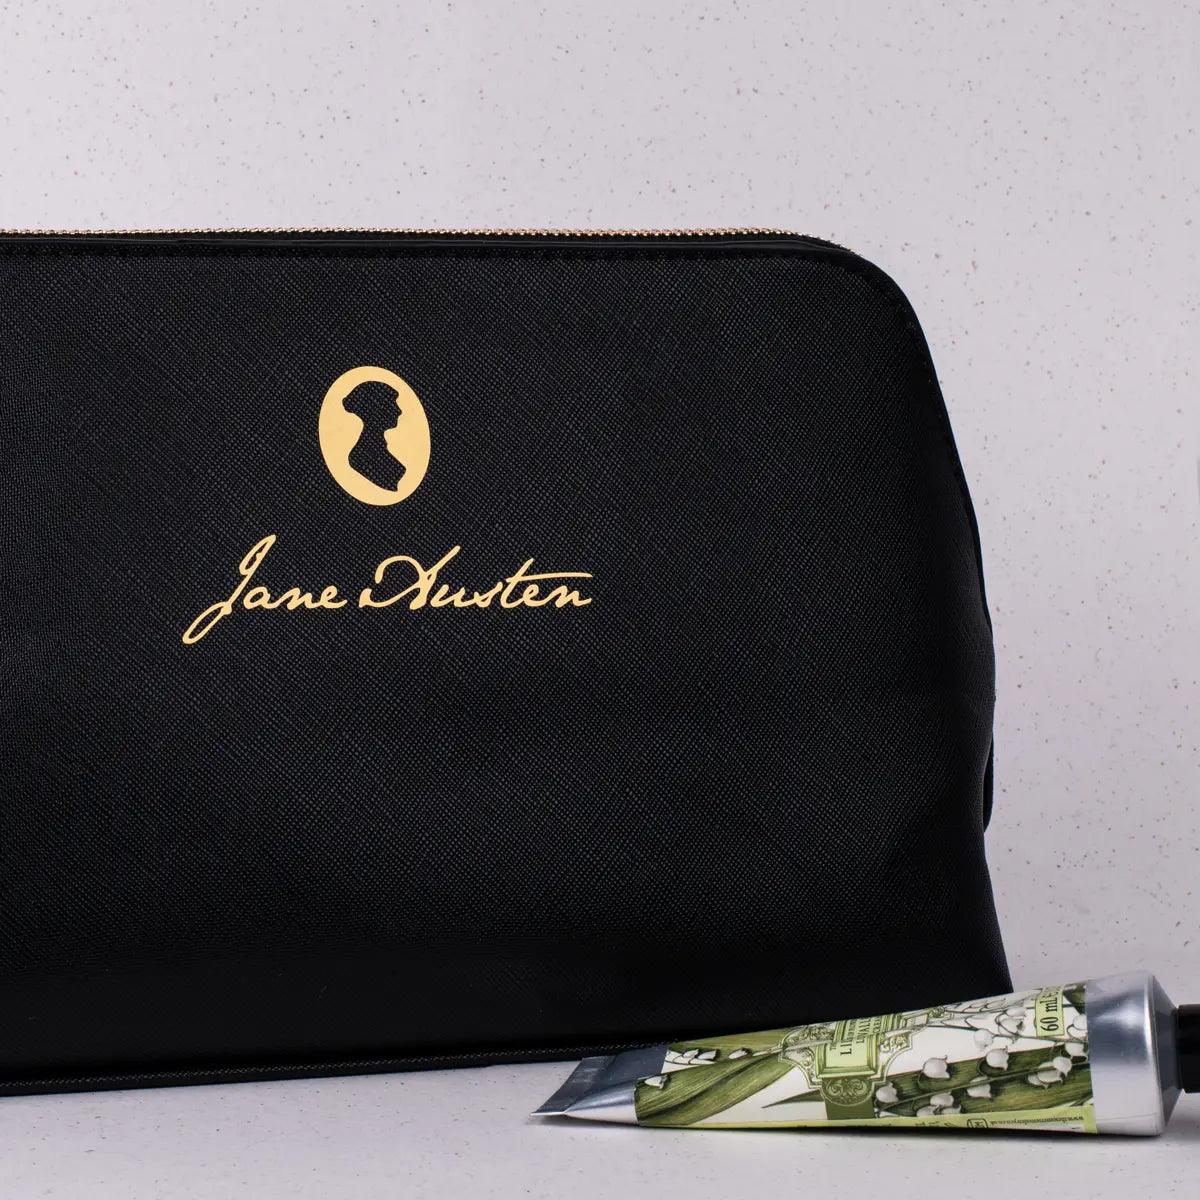 A faux leather cosmetics bag with Jane Austen's iconic signature and silhouette.